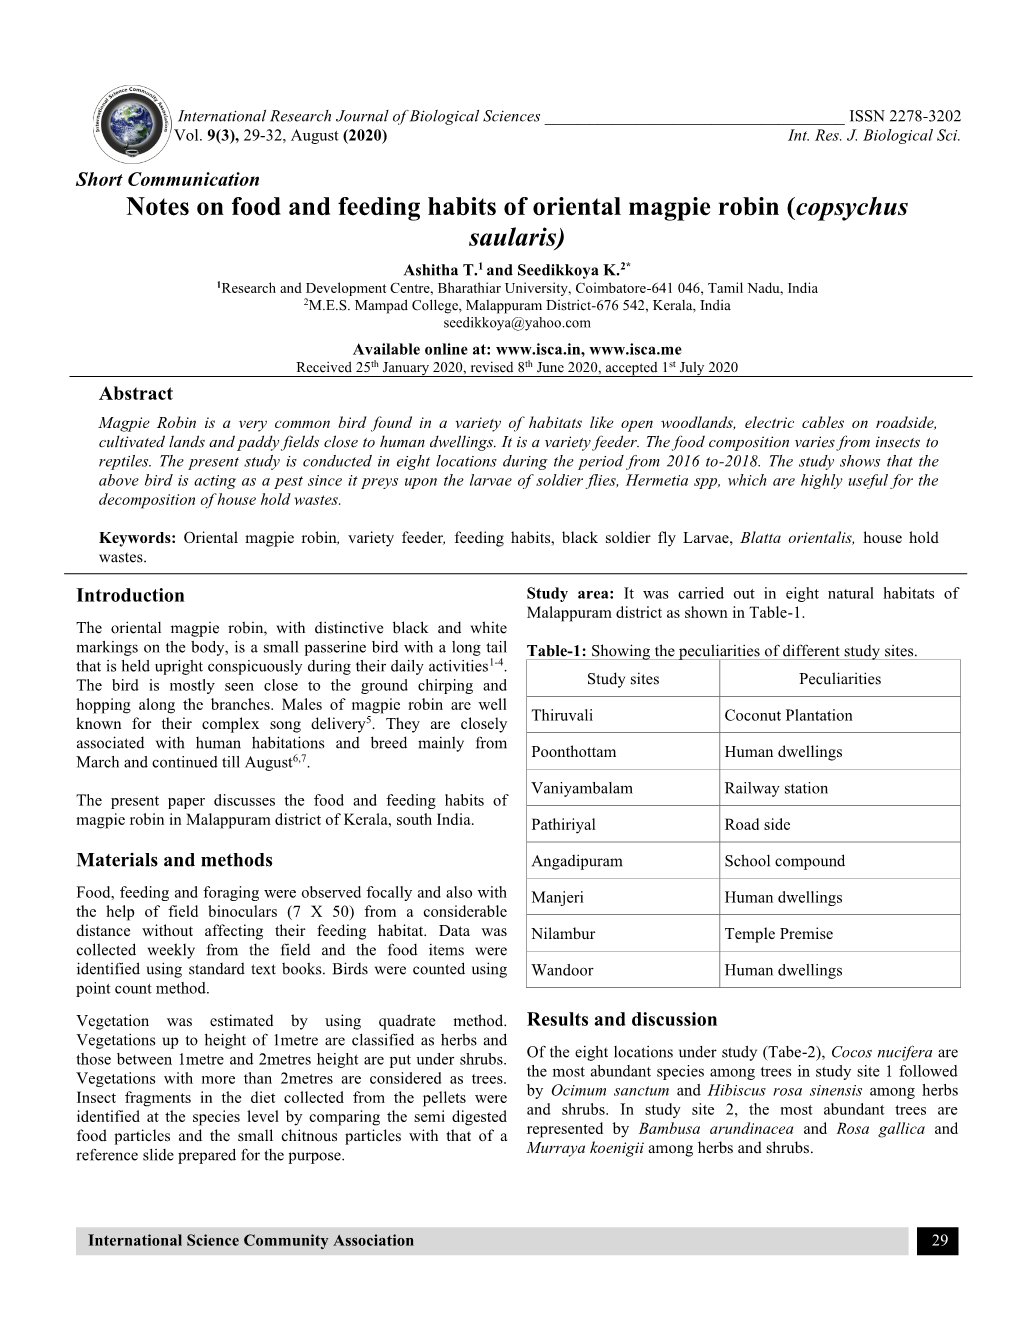 Notes on Food and Feeding Habits of Oriental Magpie Robin (Copsychus Saularis)